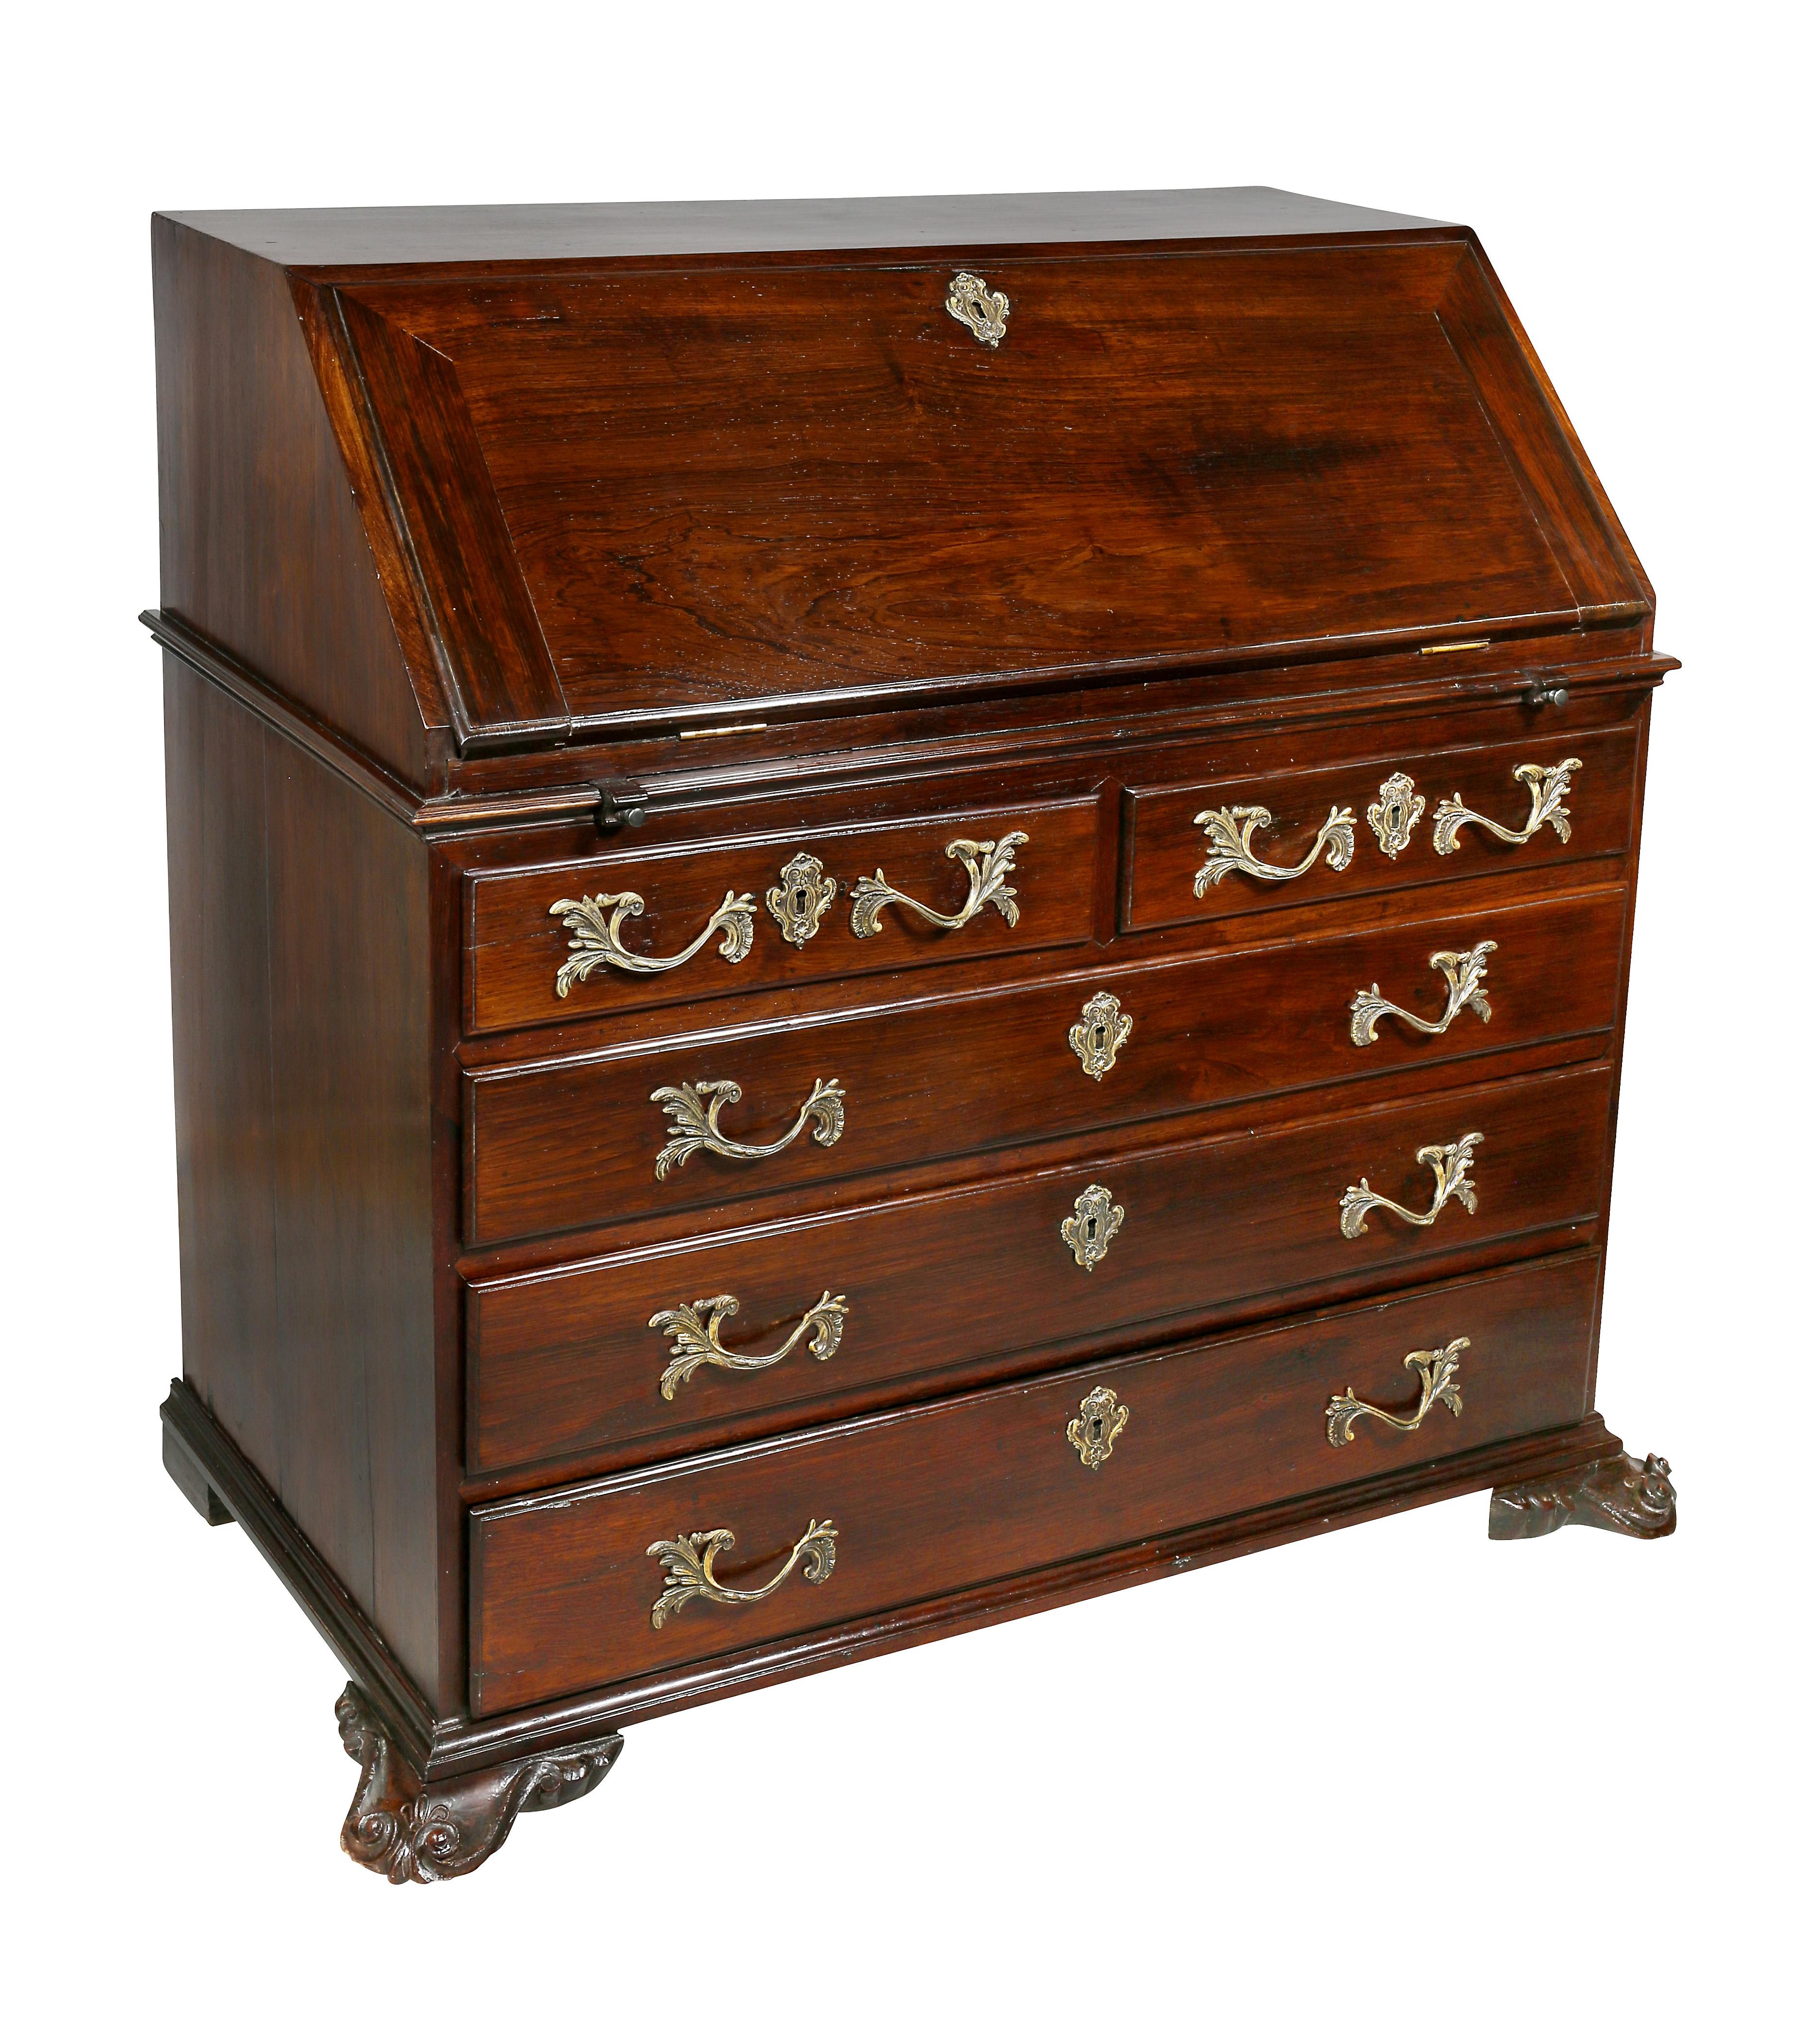 Made in Brazil and purchased as an antique in Rio De Janeiro in the 1950s. With slant lid top opening to a finely fitted compartment with drawers and cubbys and hidden compartments over two drawers over three drawers, shaped carved feet.